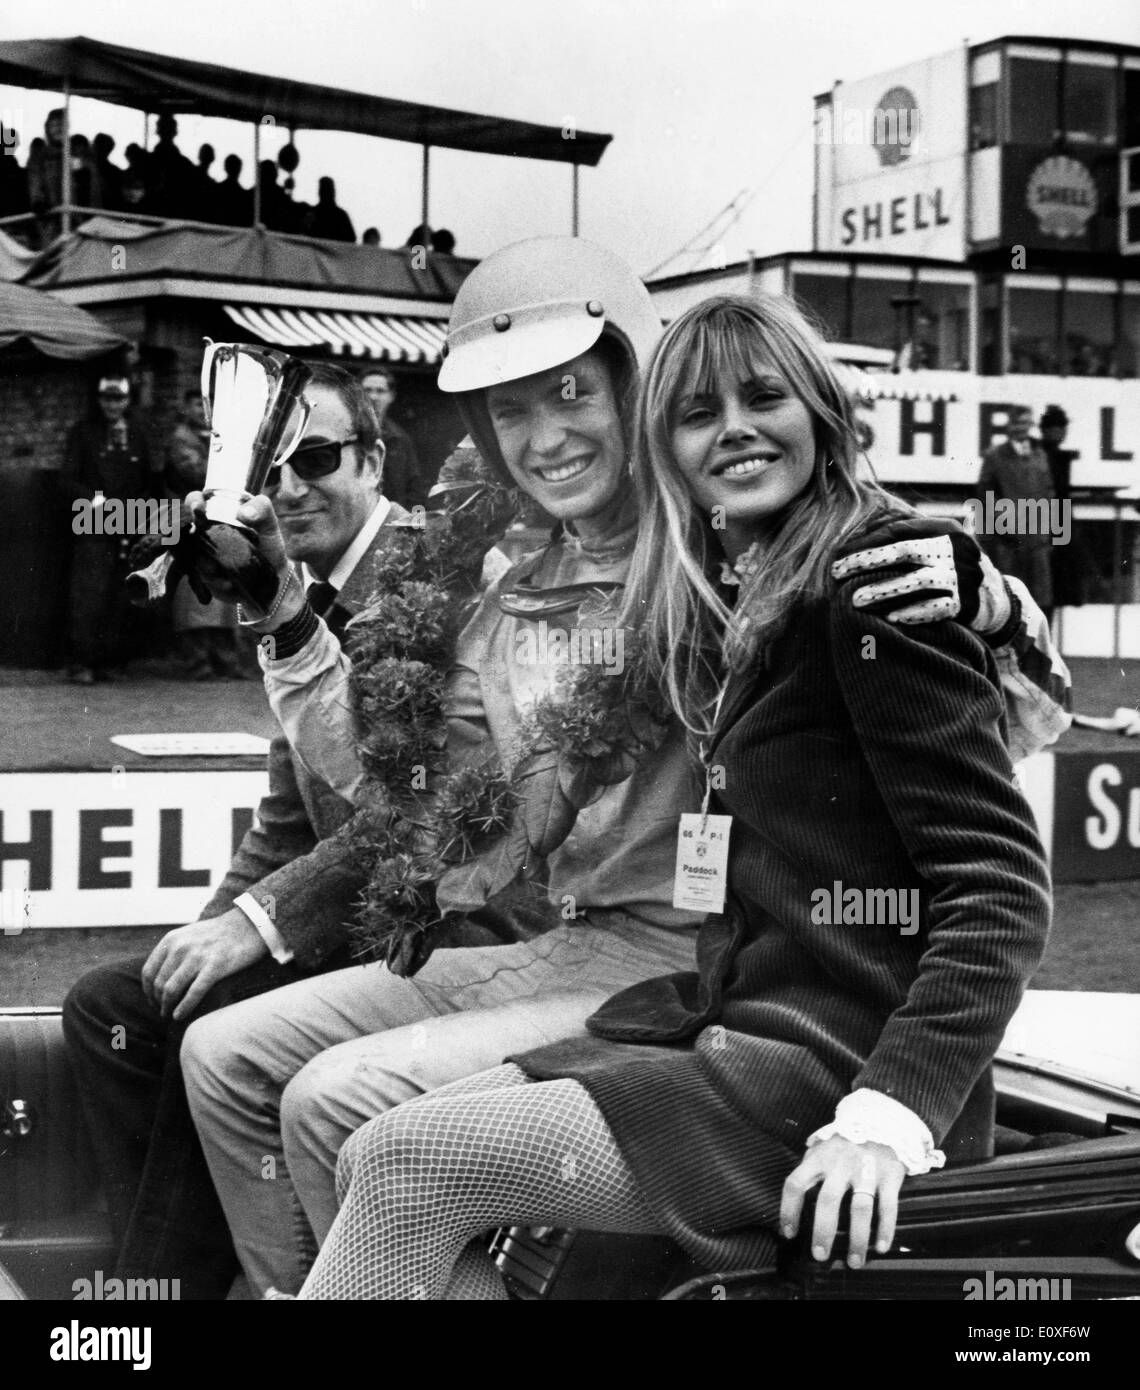 August 06, 1966, London, England. Actress Britt Ekland seated with Chris Irwin - the winner of the Formula III Trophy race - and her husband, actor Peter Sellers, after the race. 